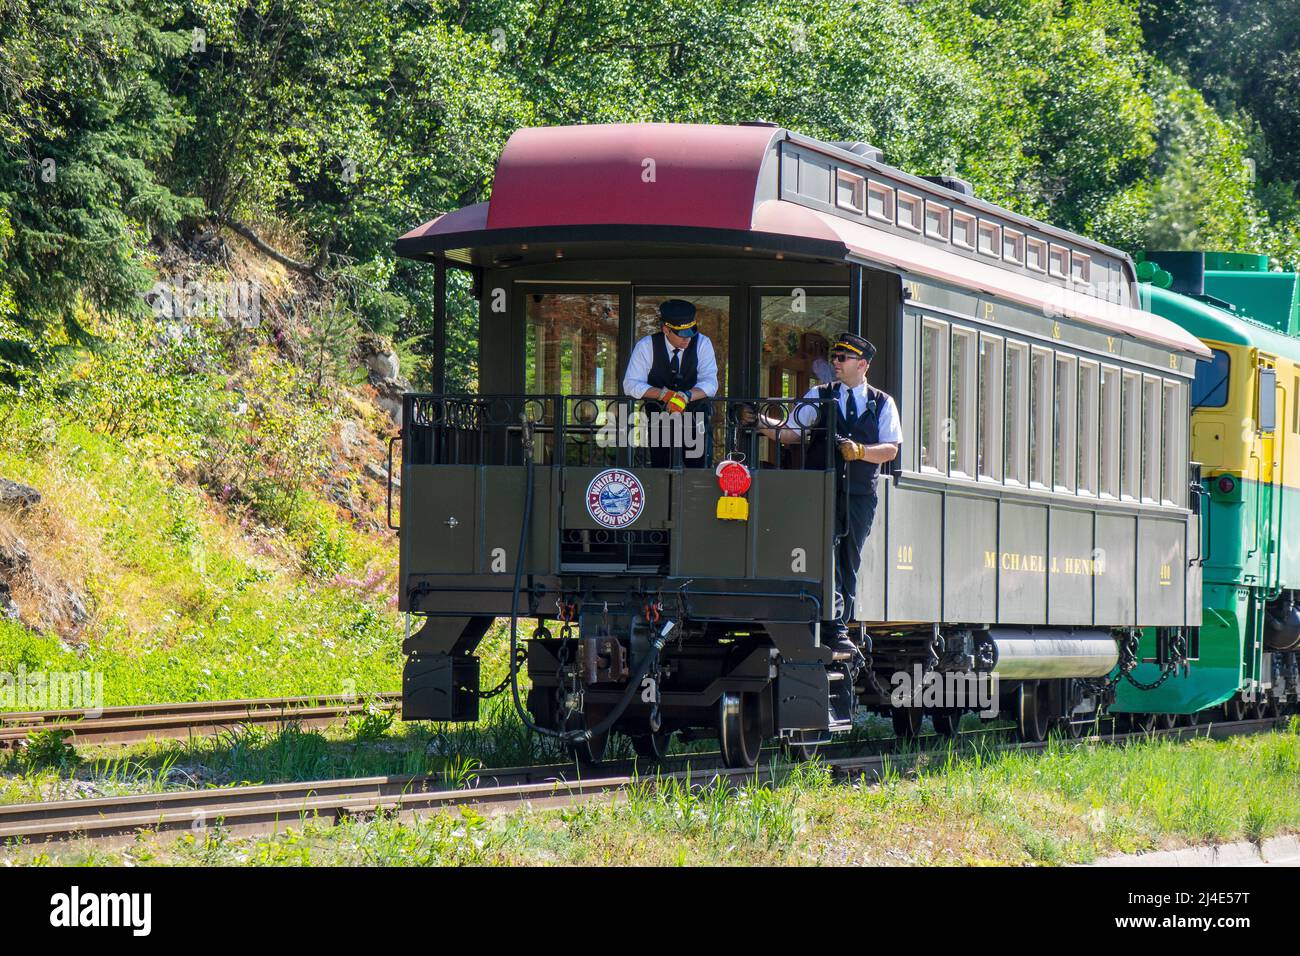 Rail Conductors Guide A Historic Rail Car Being Pushed By A Diesel Electric Train 93 White Pass Yukon Route Railway Shunted Tourist Train Passenger Tr Stock Photo